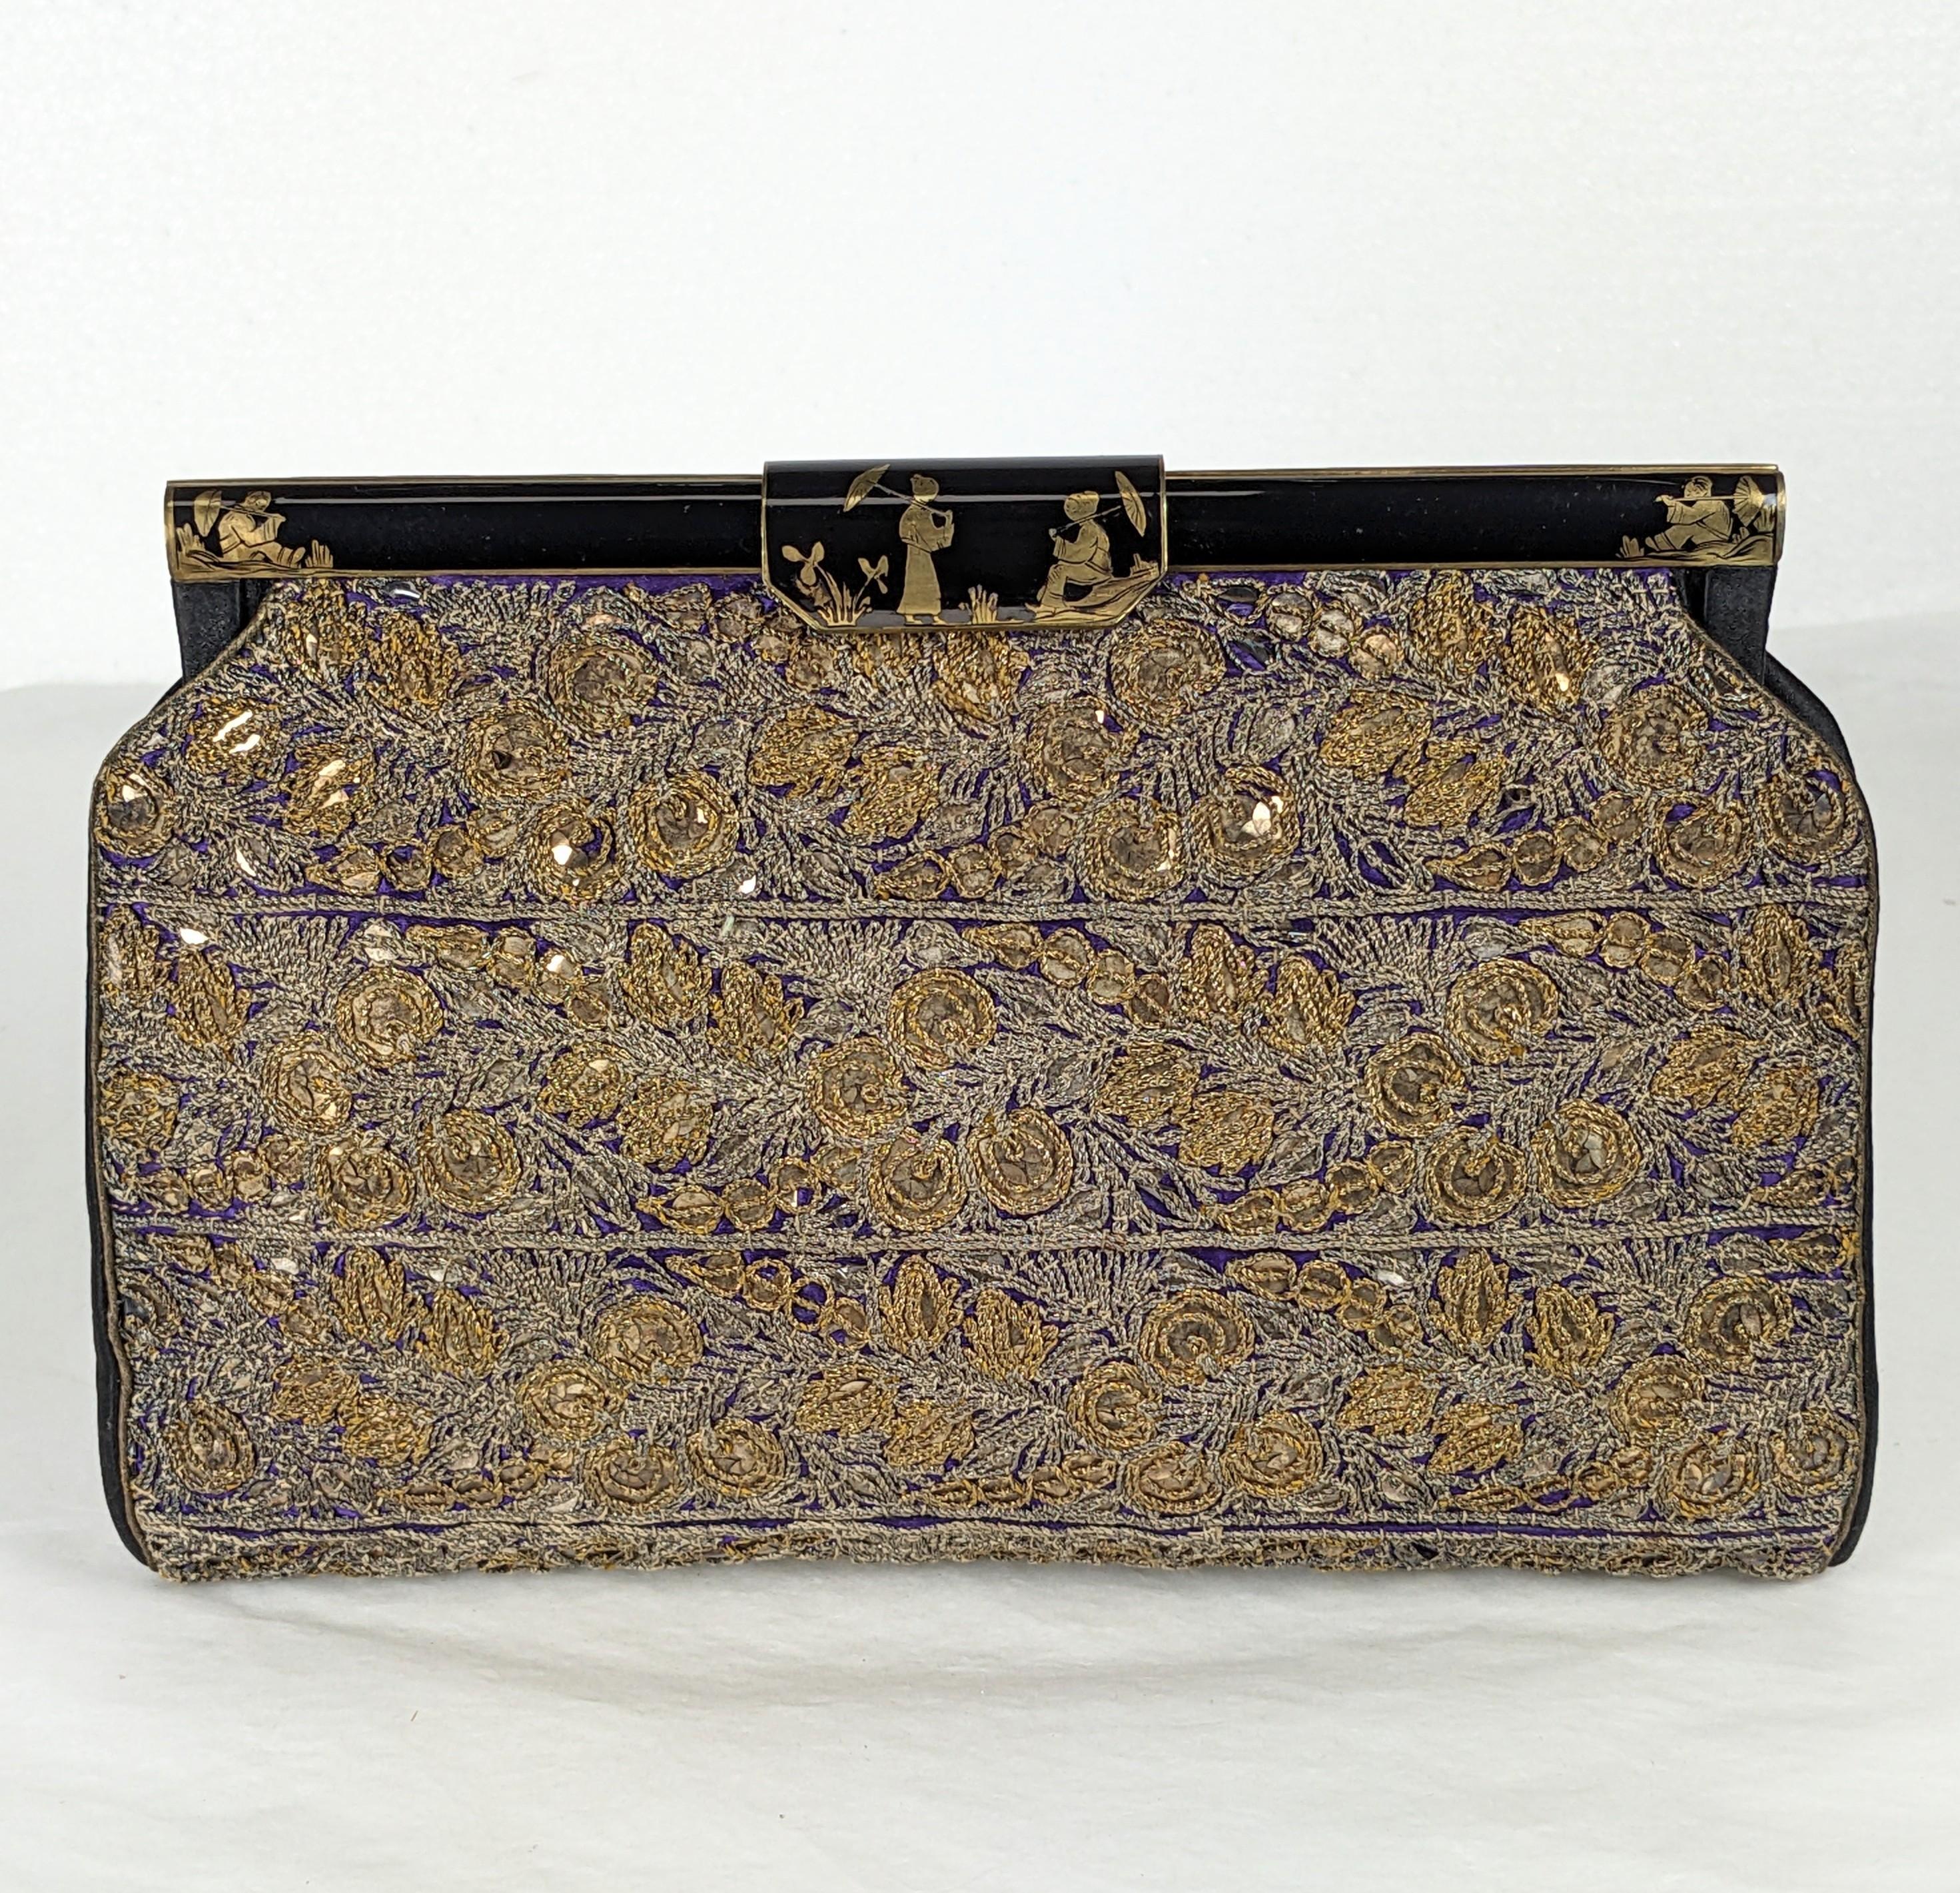 Amazing French Chinoiserie Embroidered Sequin Clutch with enameled silver frame. Beautifully hand embroidered with gold and silver tinsel threads over gold sequins on a vibrant purple satin. Enamel is hand painted with gilt Chinoiserie motifs. Black